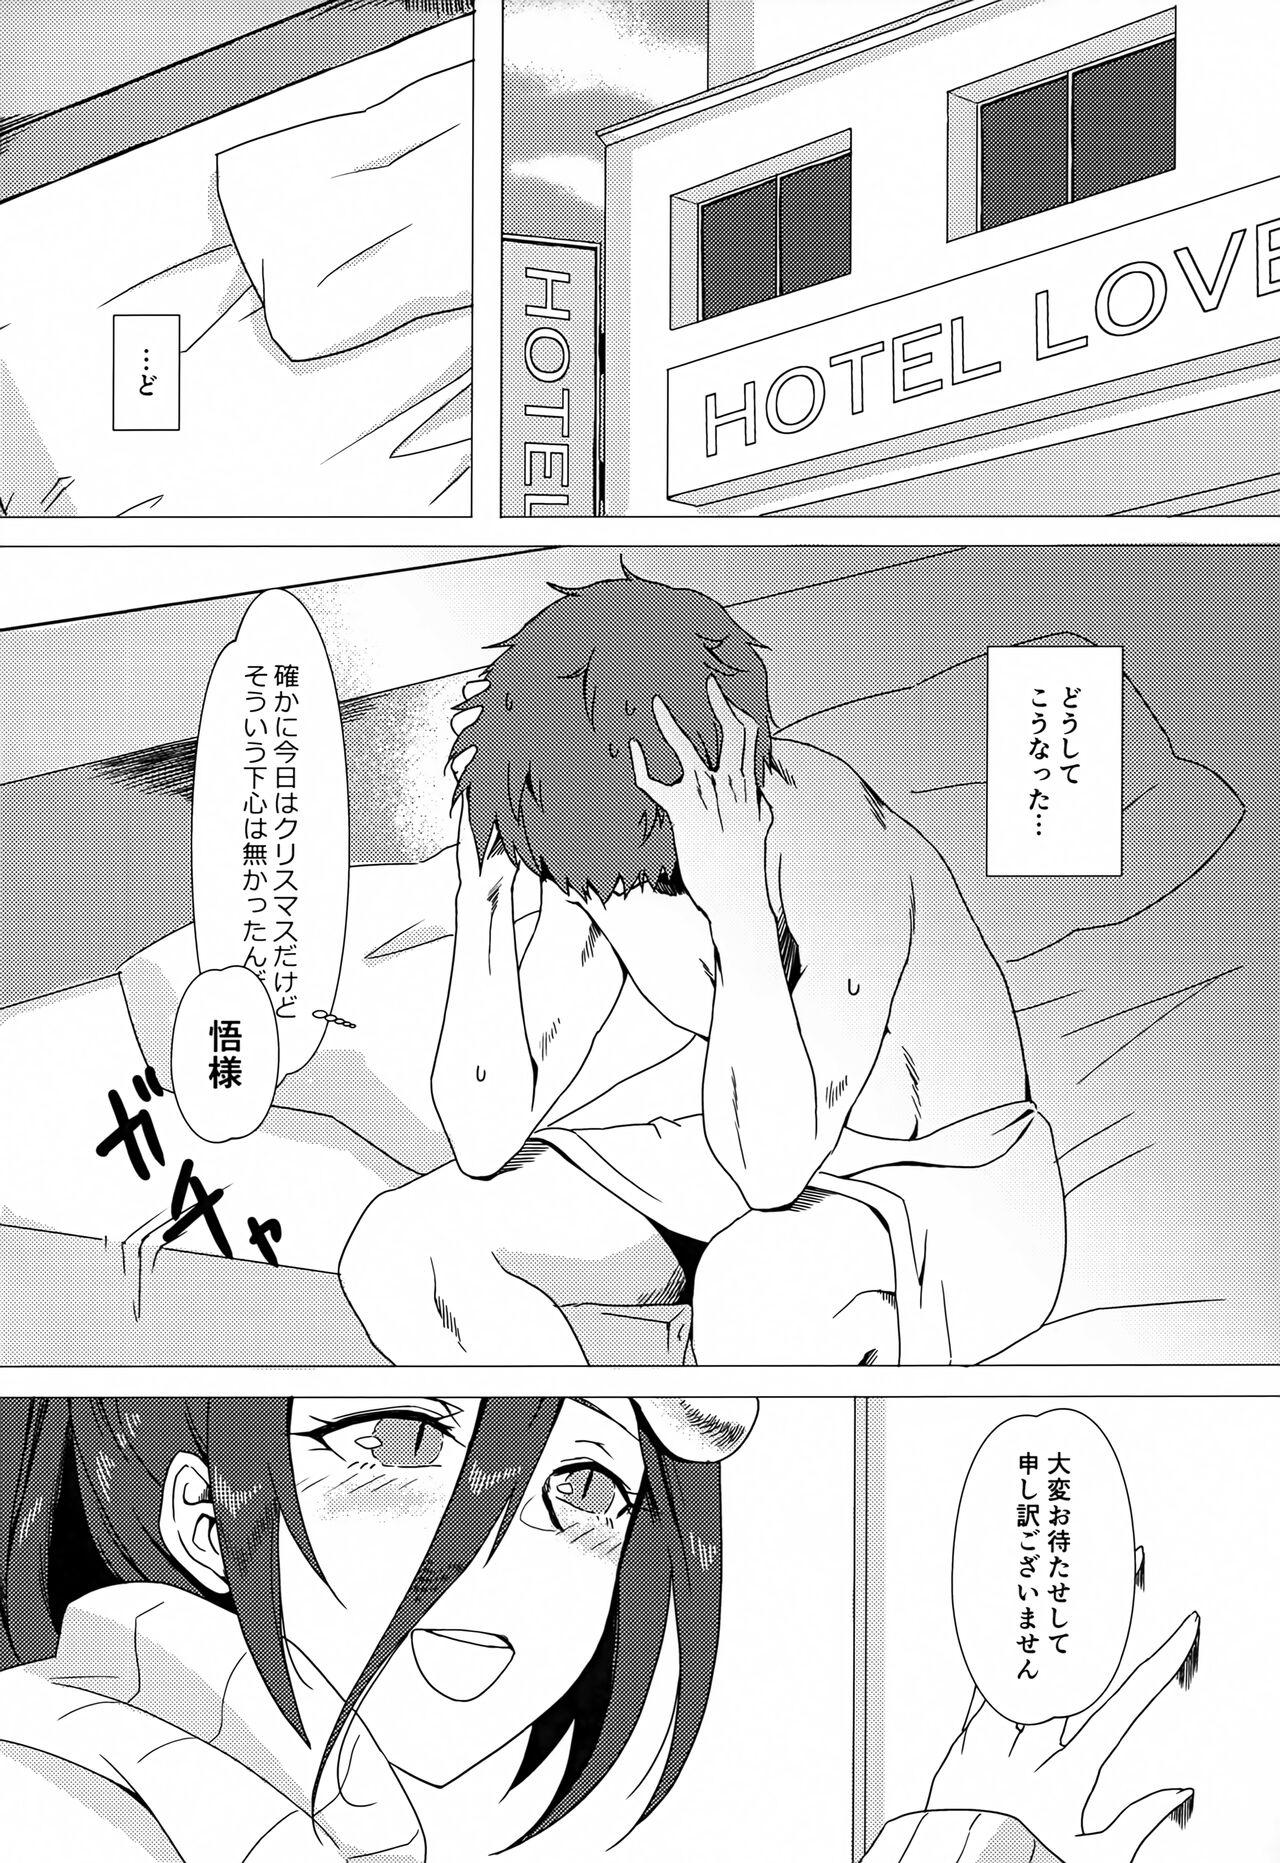 Strap On Albedo-san to! 2 - Overlord Long Hair - Page 7